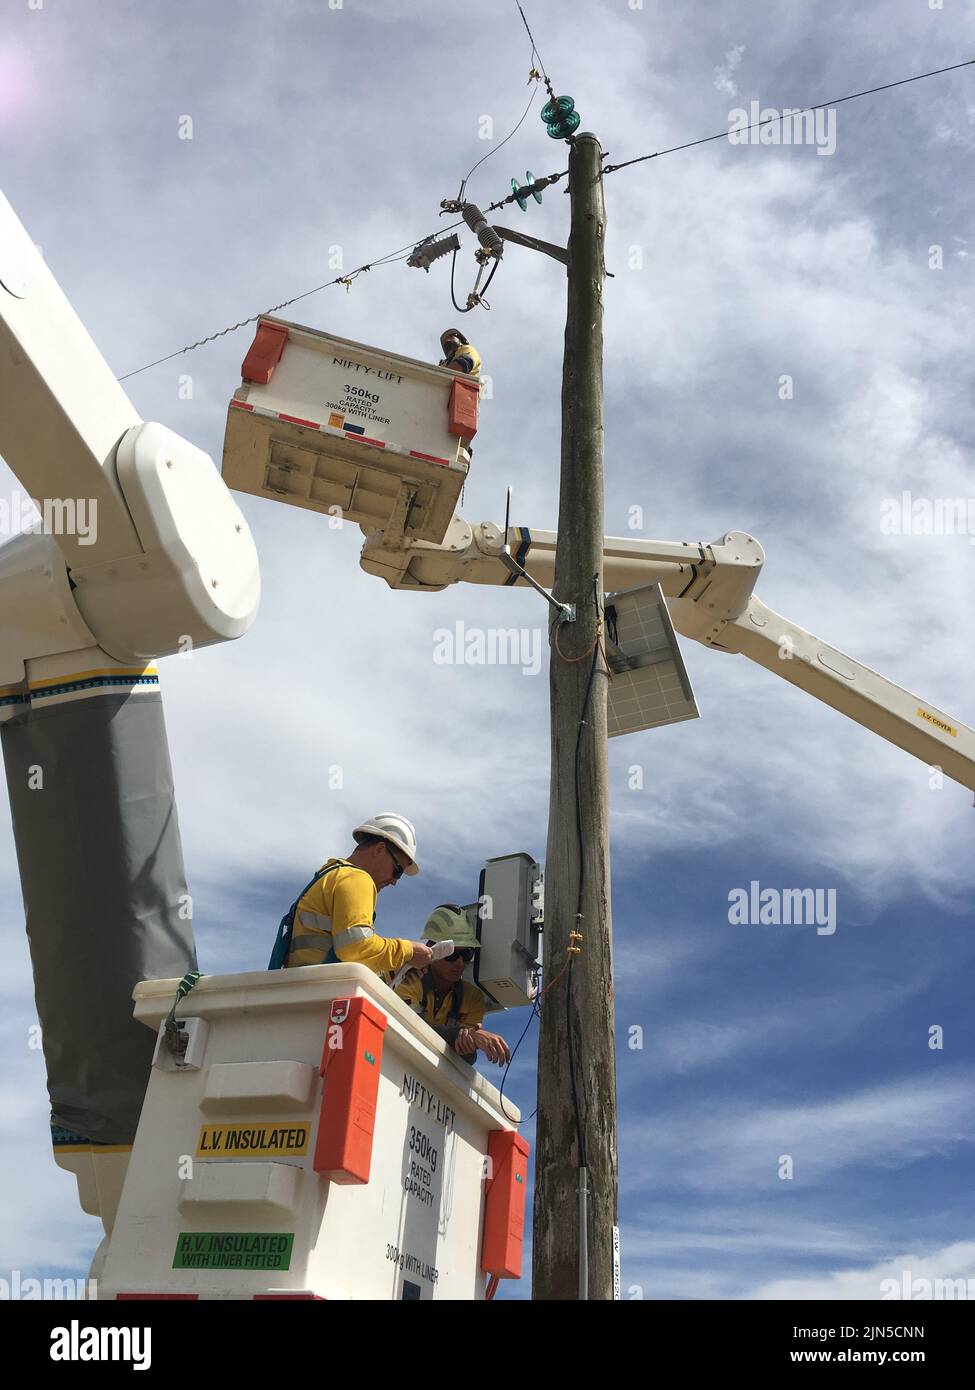 Powerline workers working on a pole Stock Photo